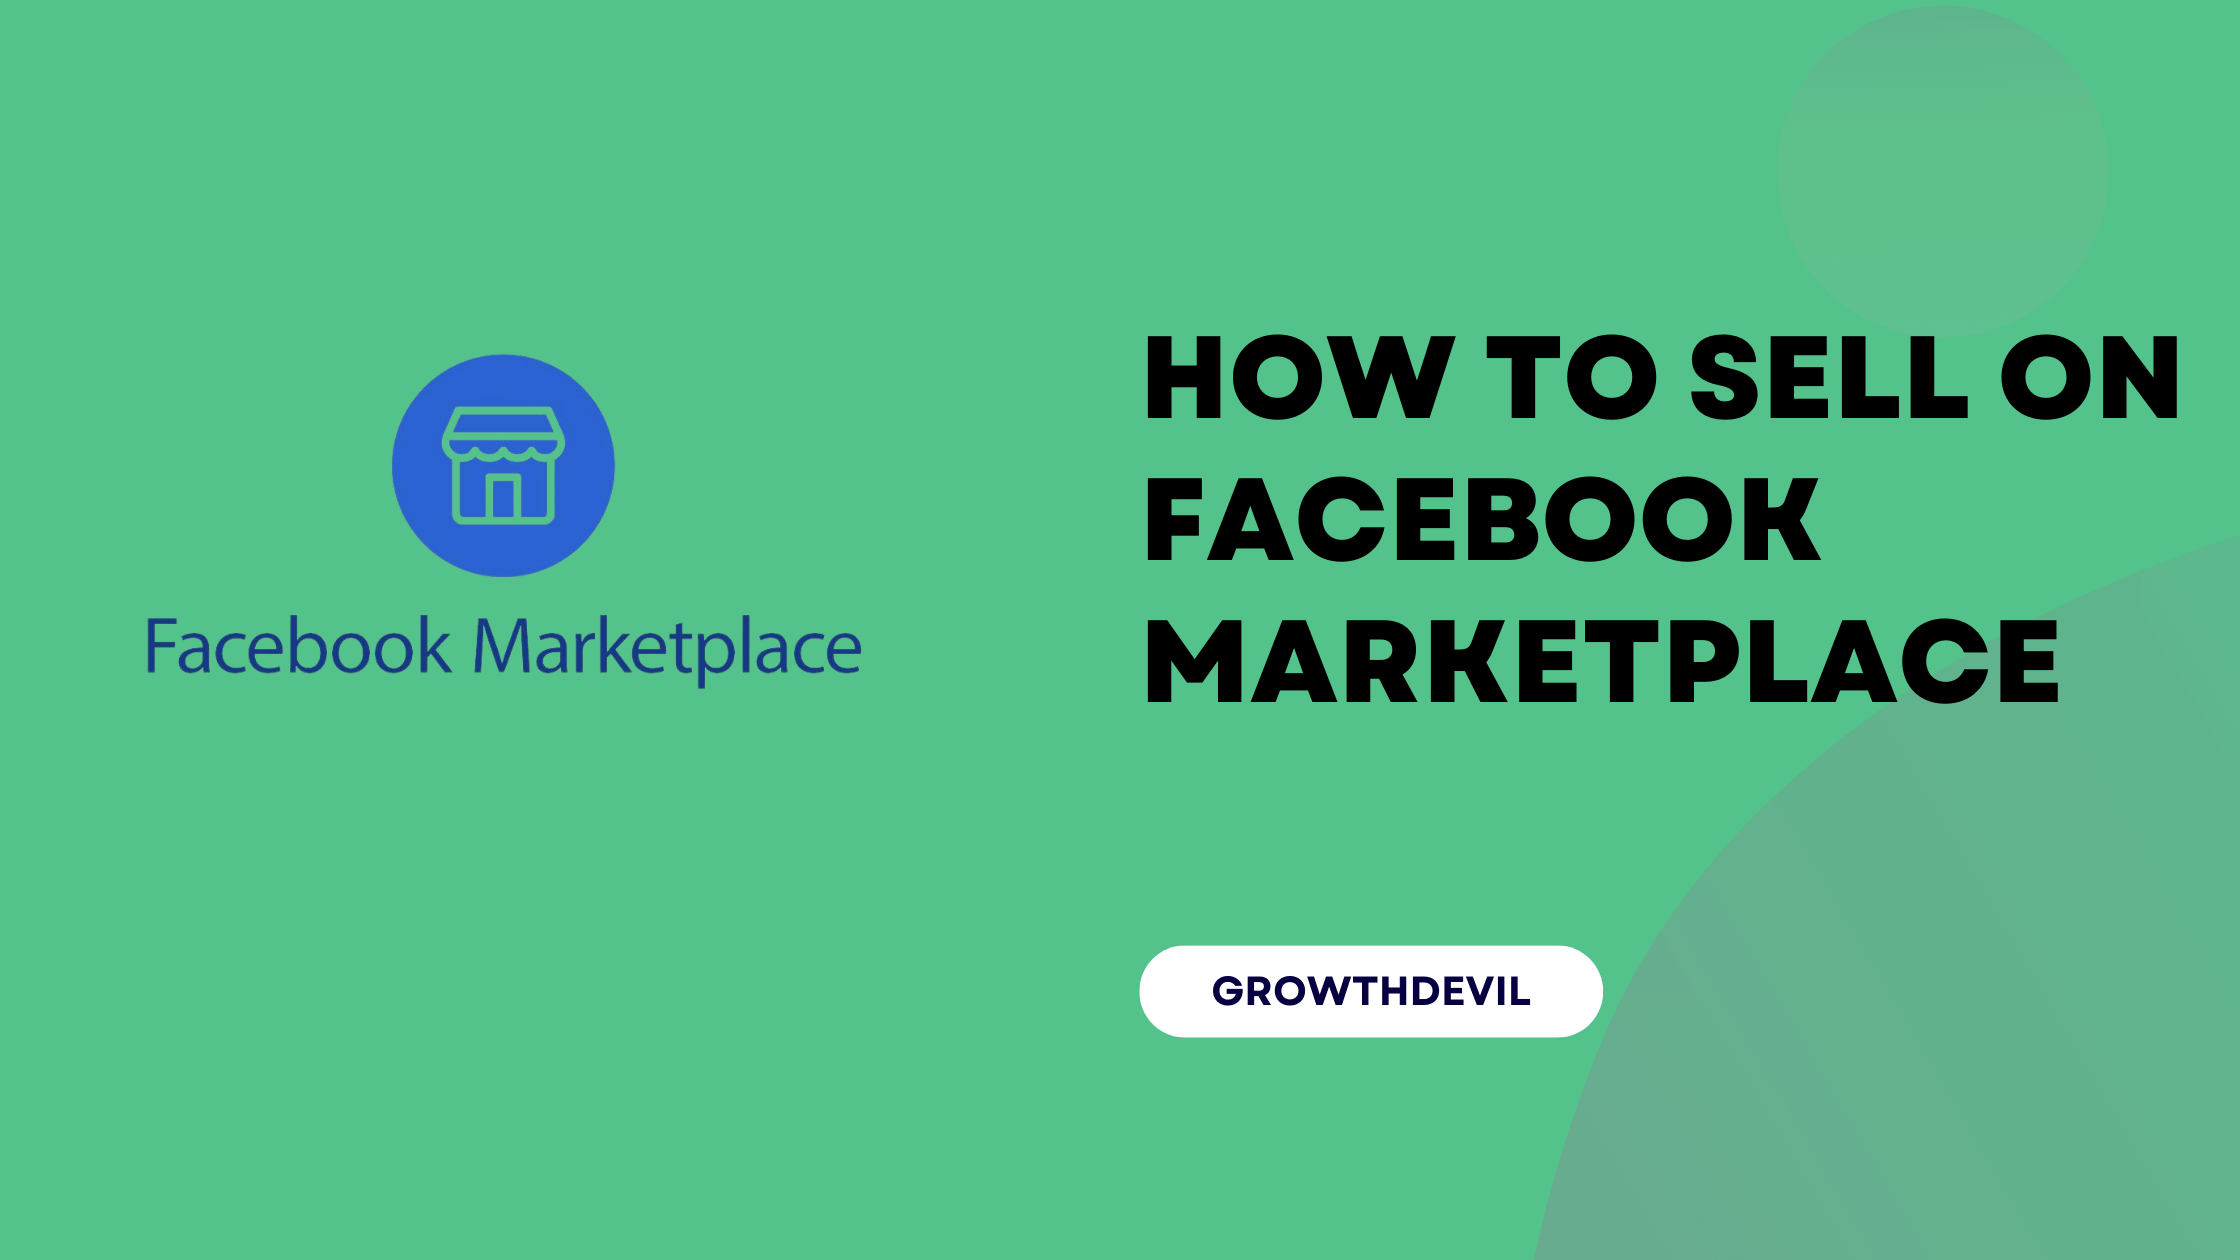 How To Sell On Facebook Marketplace - GrowthDevil